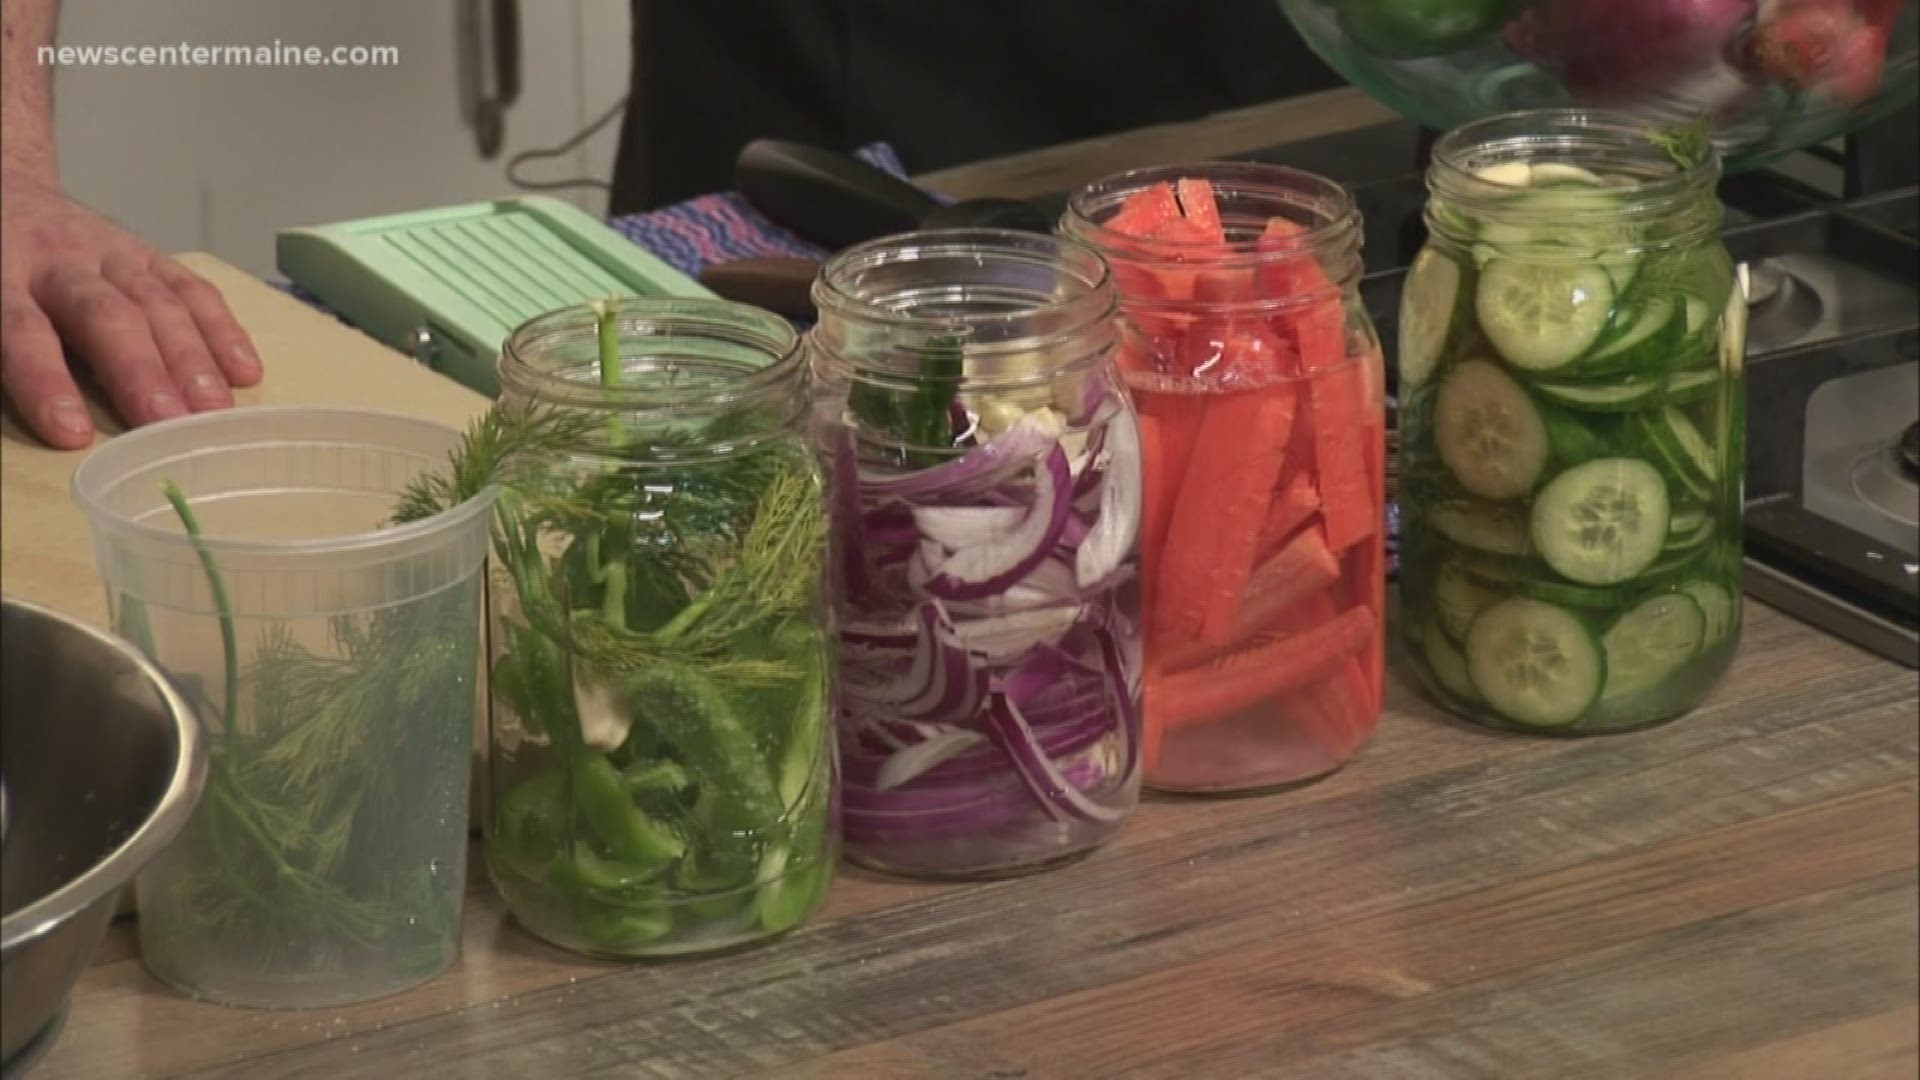 Thistle Pig's Chef Ben Hasty shows us an easy way to make pickles.